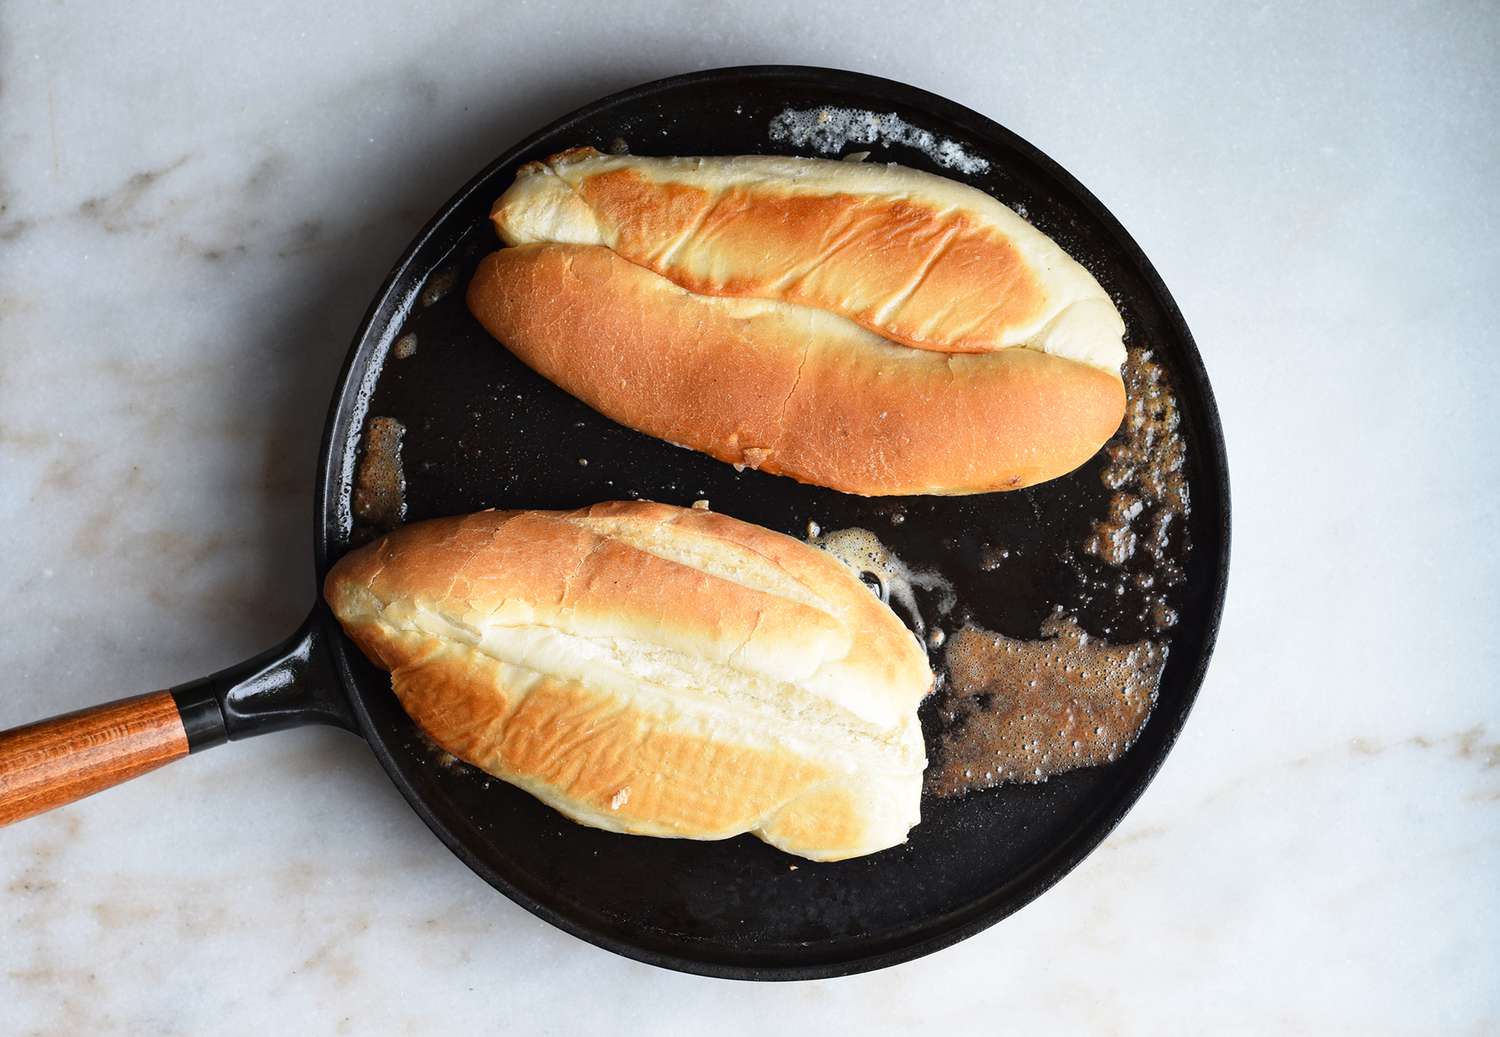 hoagie rolls grilled in a buttered pan